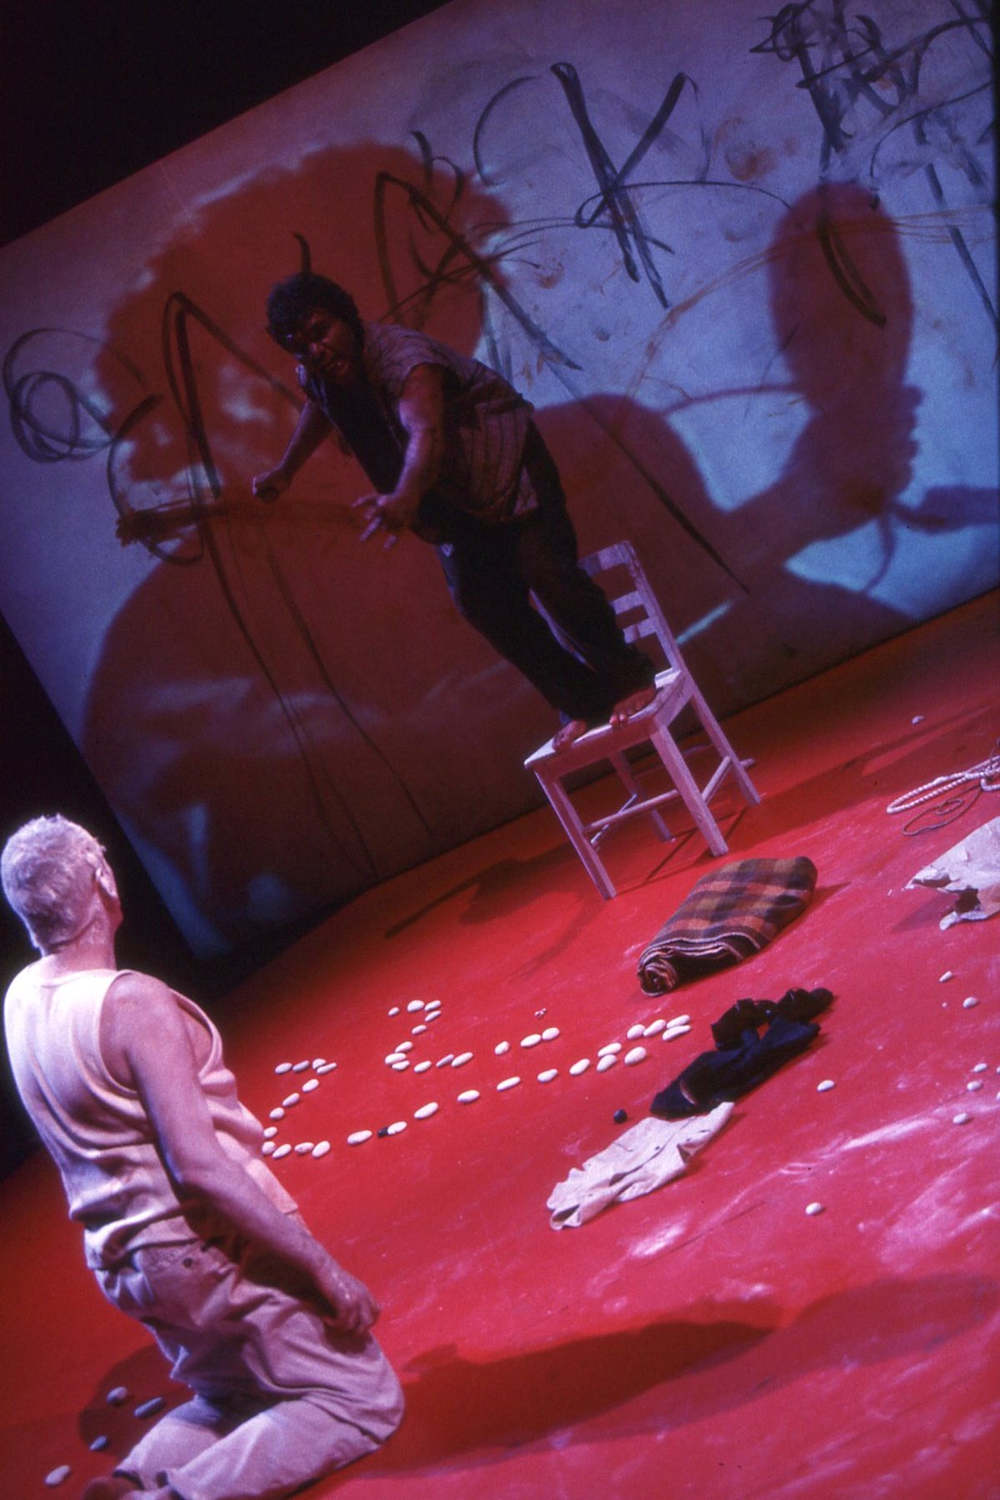 Lift Em Up Socks Handspan Theatre Aboriginal actor standing on chair upstage speaking to a white actor kneeling on red floorcloth beside a white stone pattern